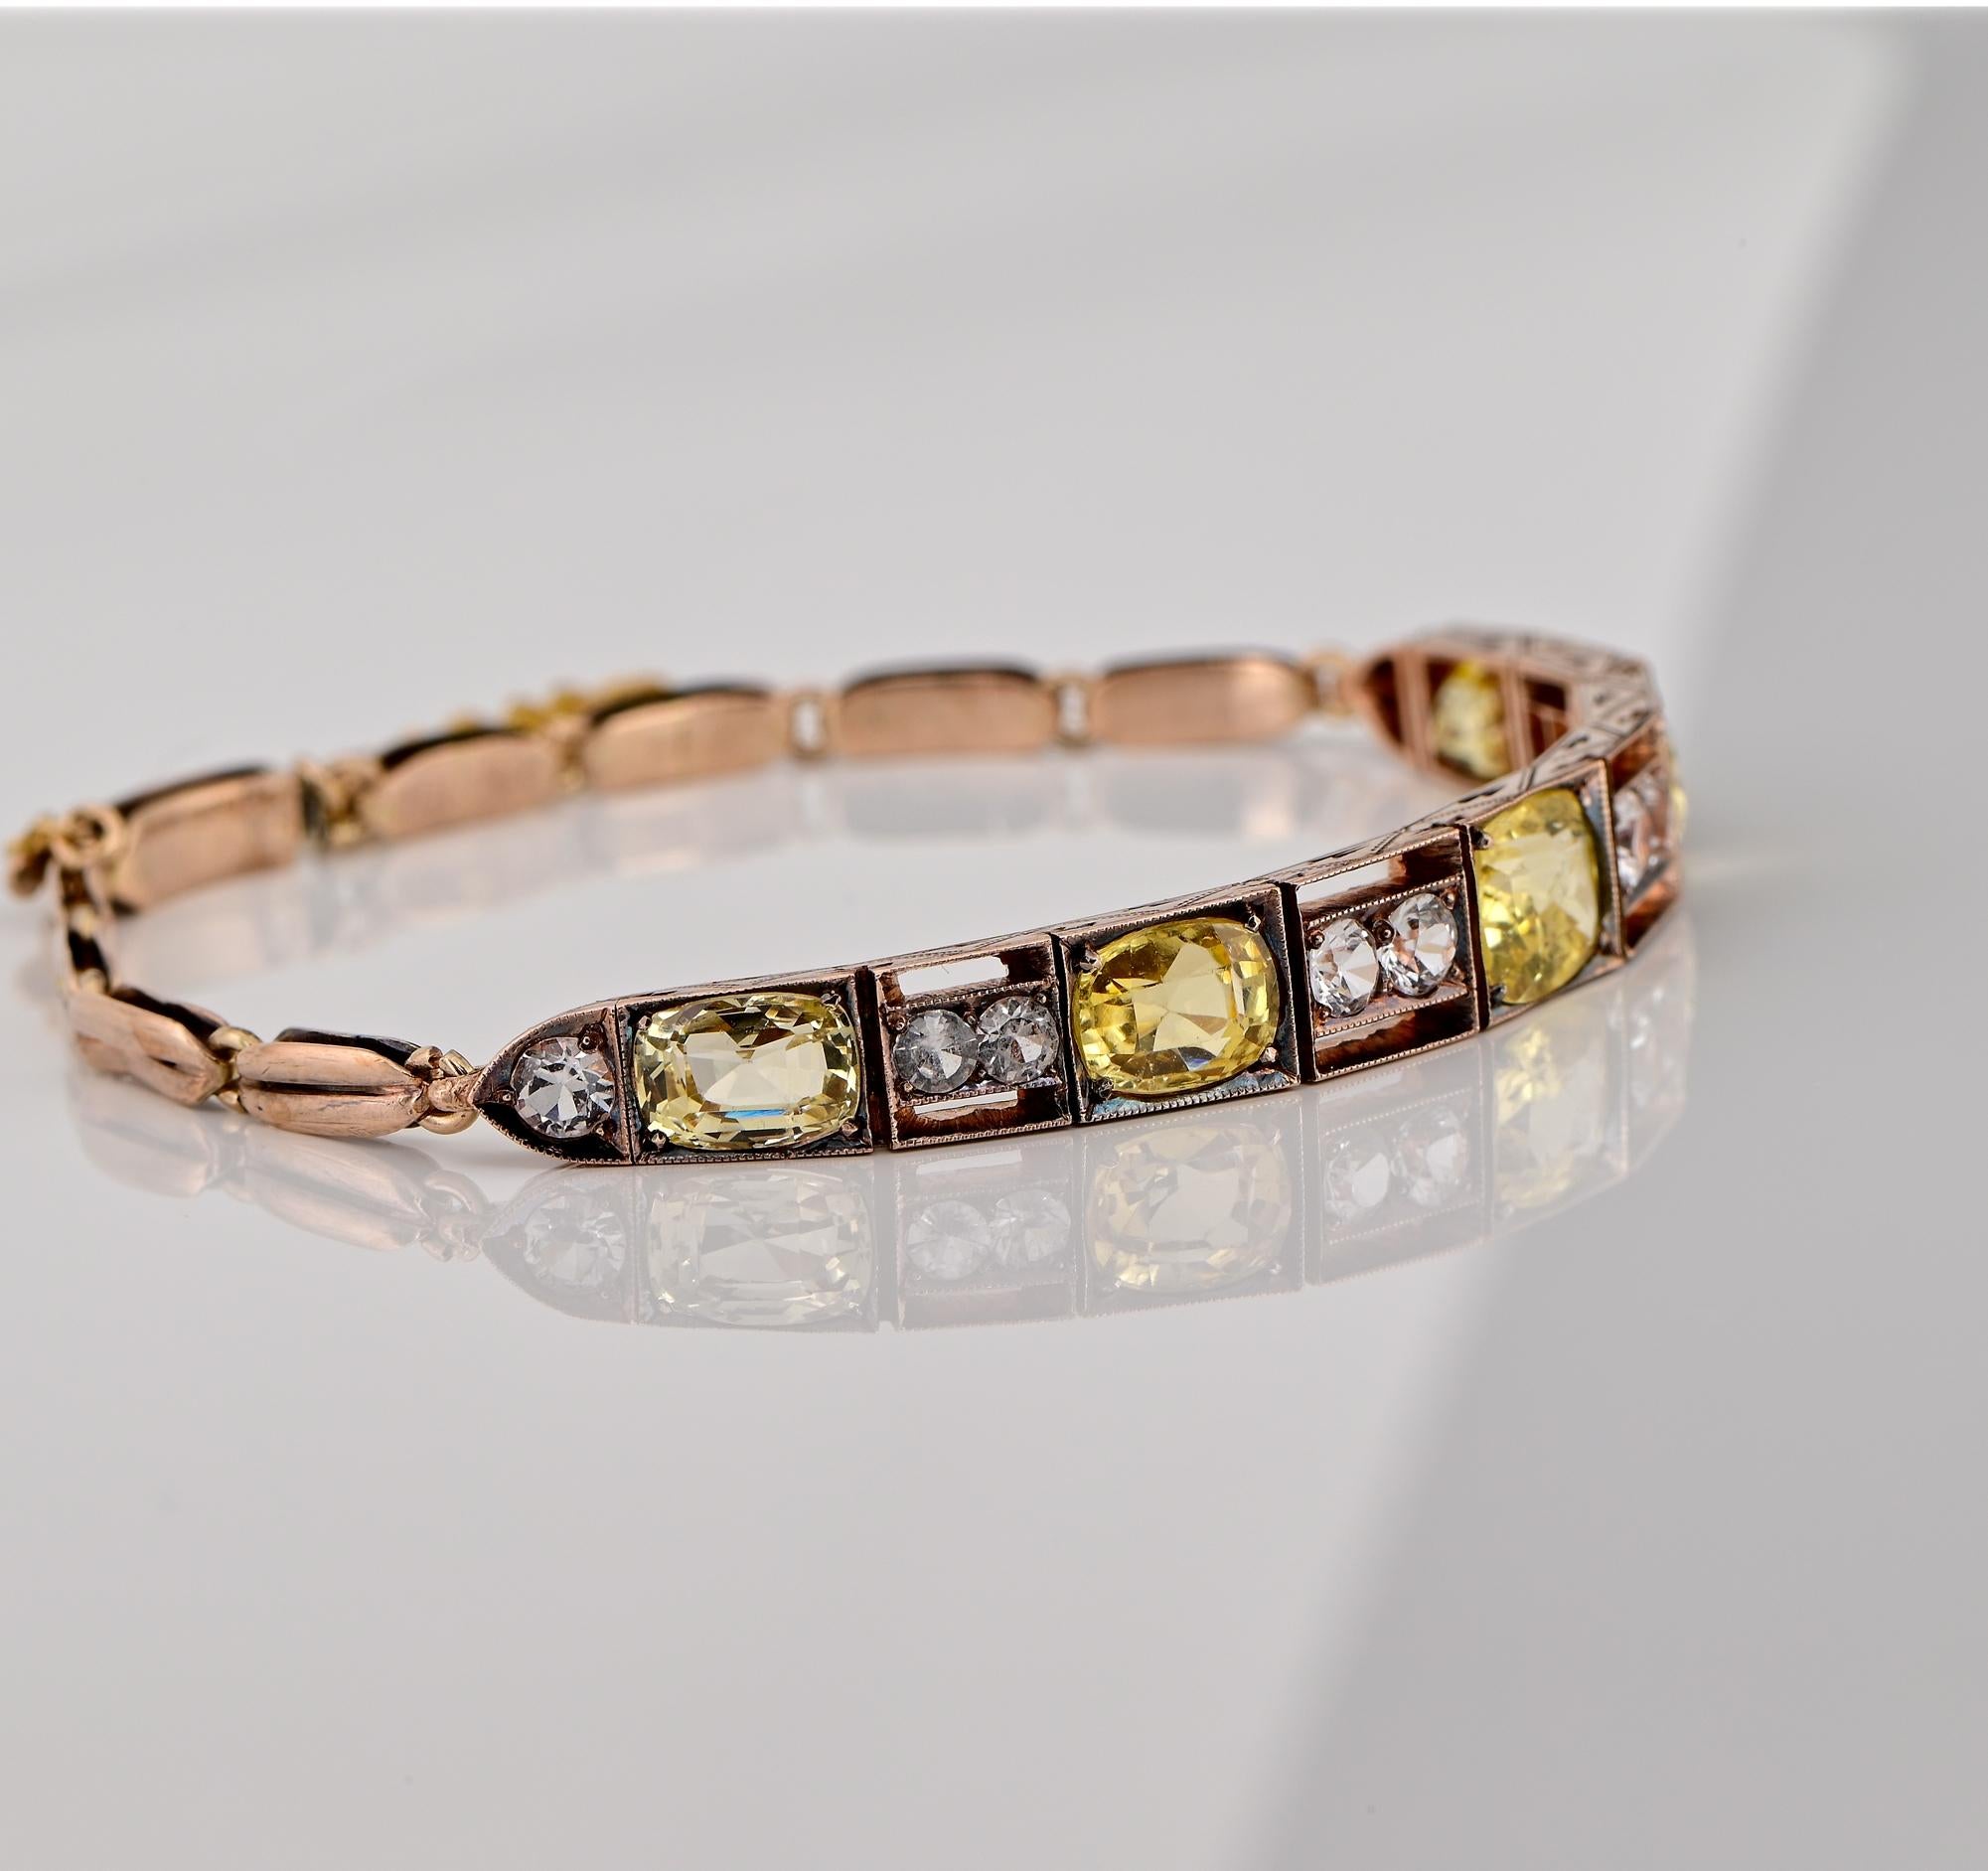 Edwardian 7.13 Ct Untreated Sapphire Plus 18 KT Bracelet In Good Condition For Sale In Napoli, IT